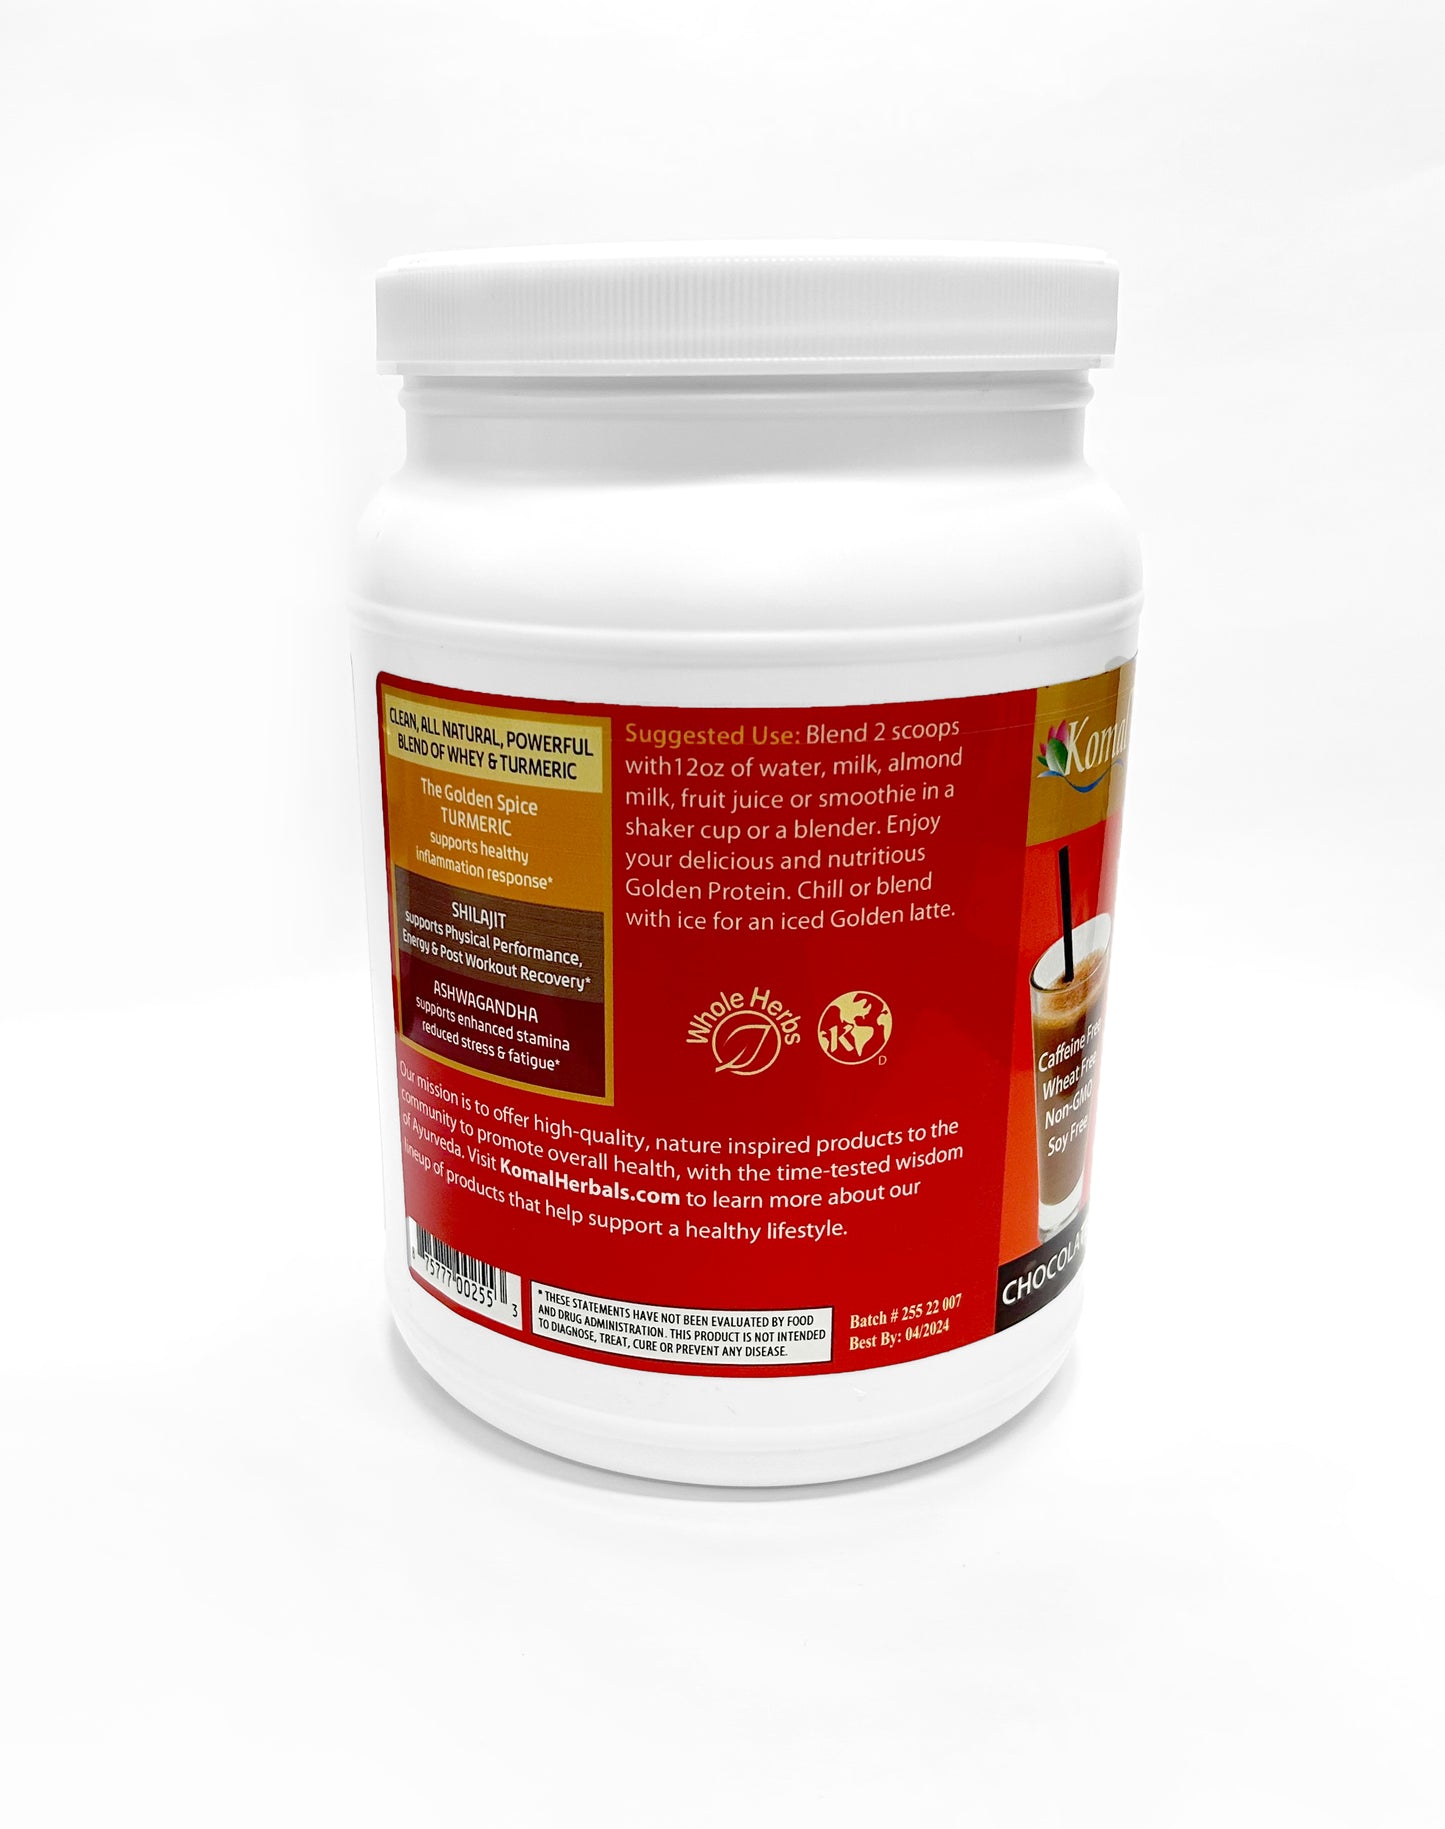 Wholesale - Golden-T Whey Protein, Chocolate - 1.76 lbs (800g)